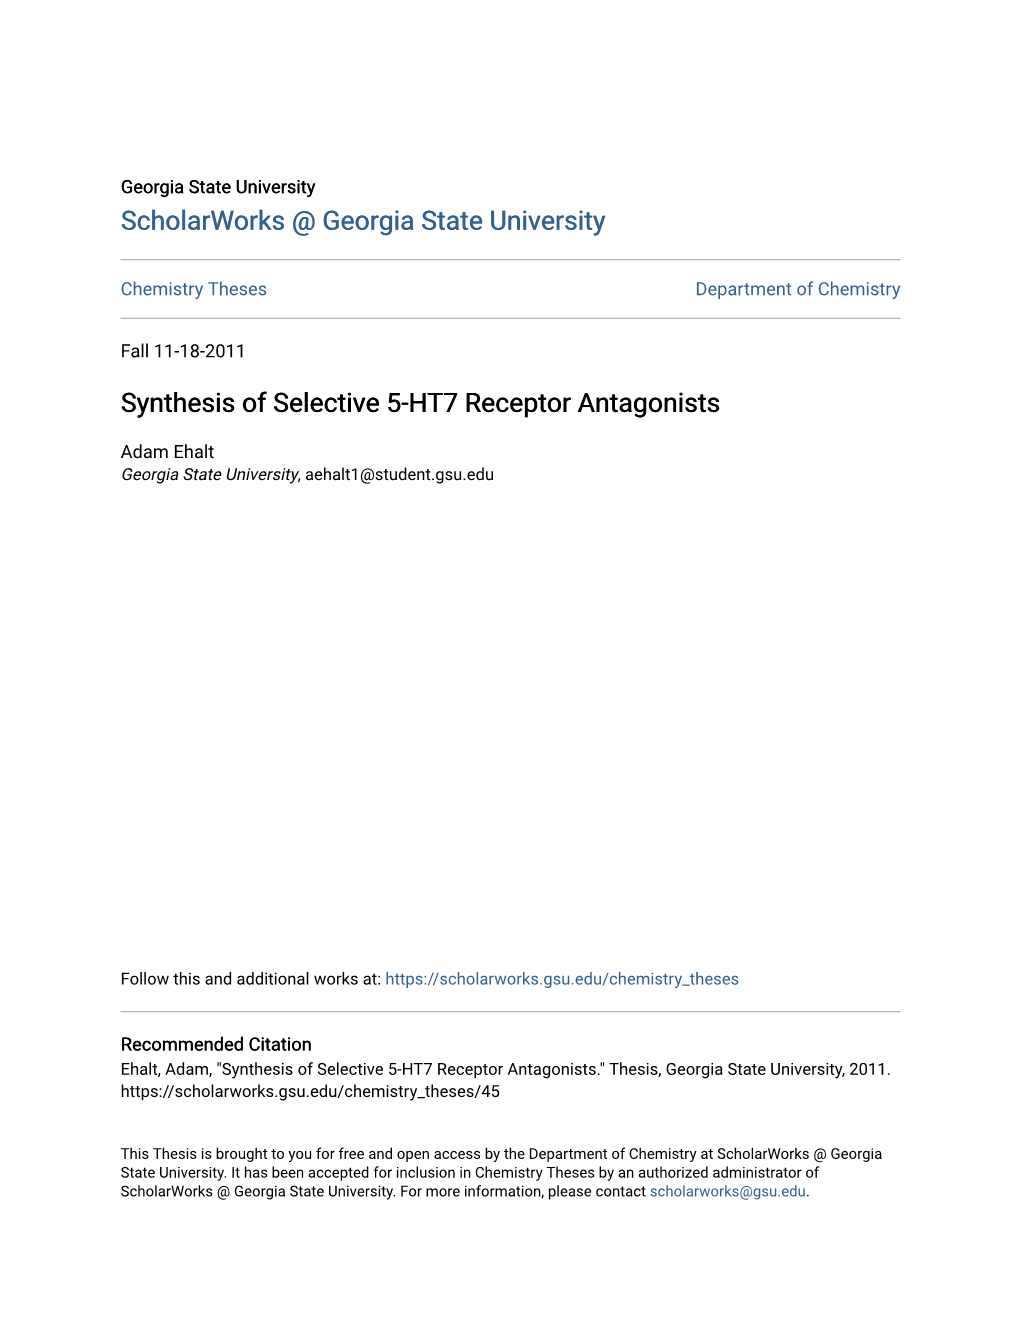 Synthesis of Selective 5-HT7 Receptor Antagonists